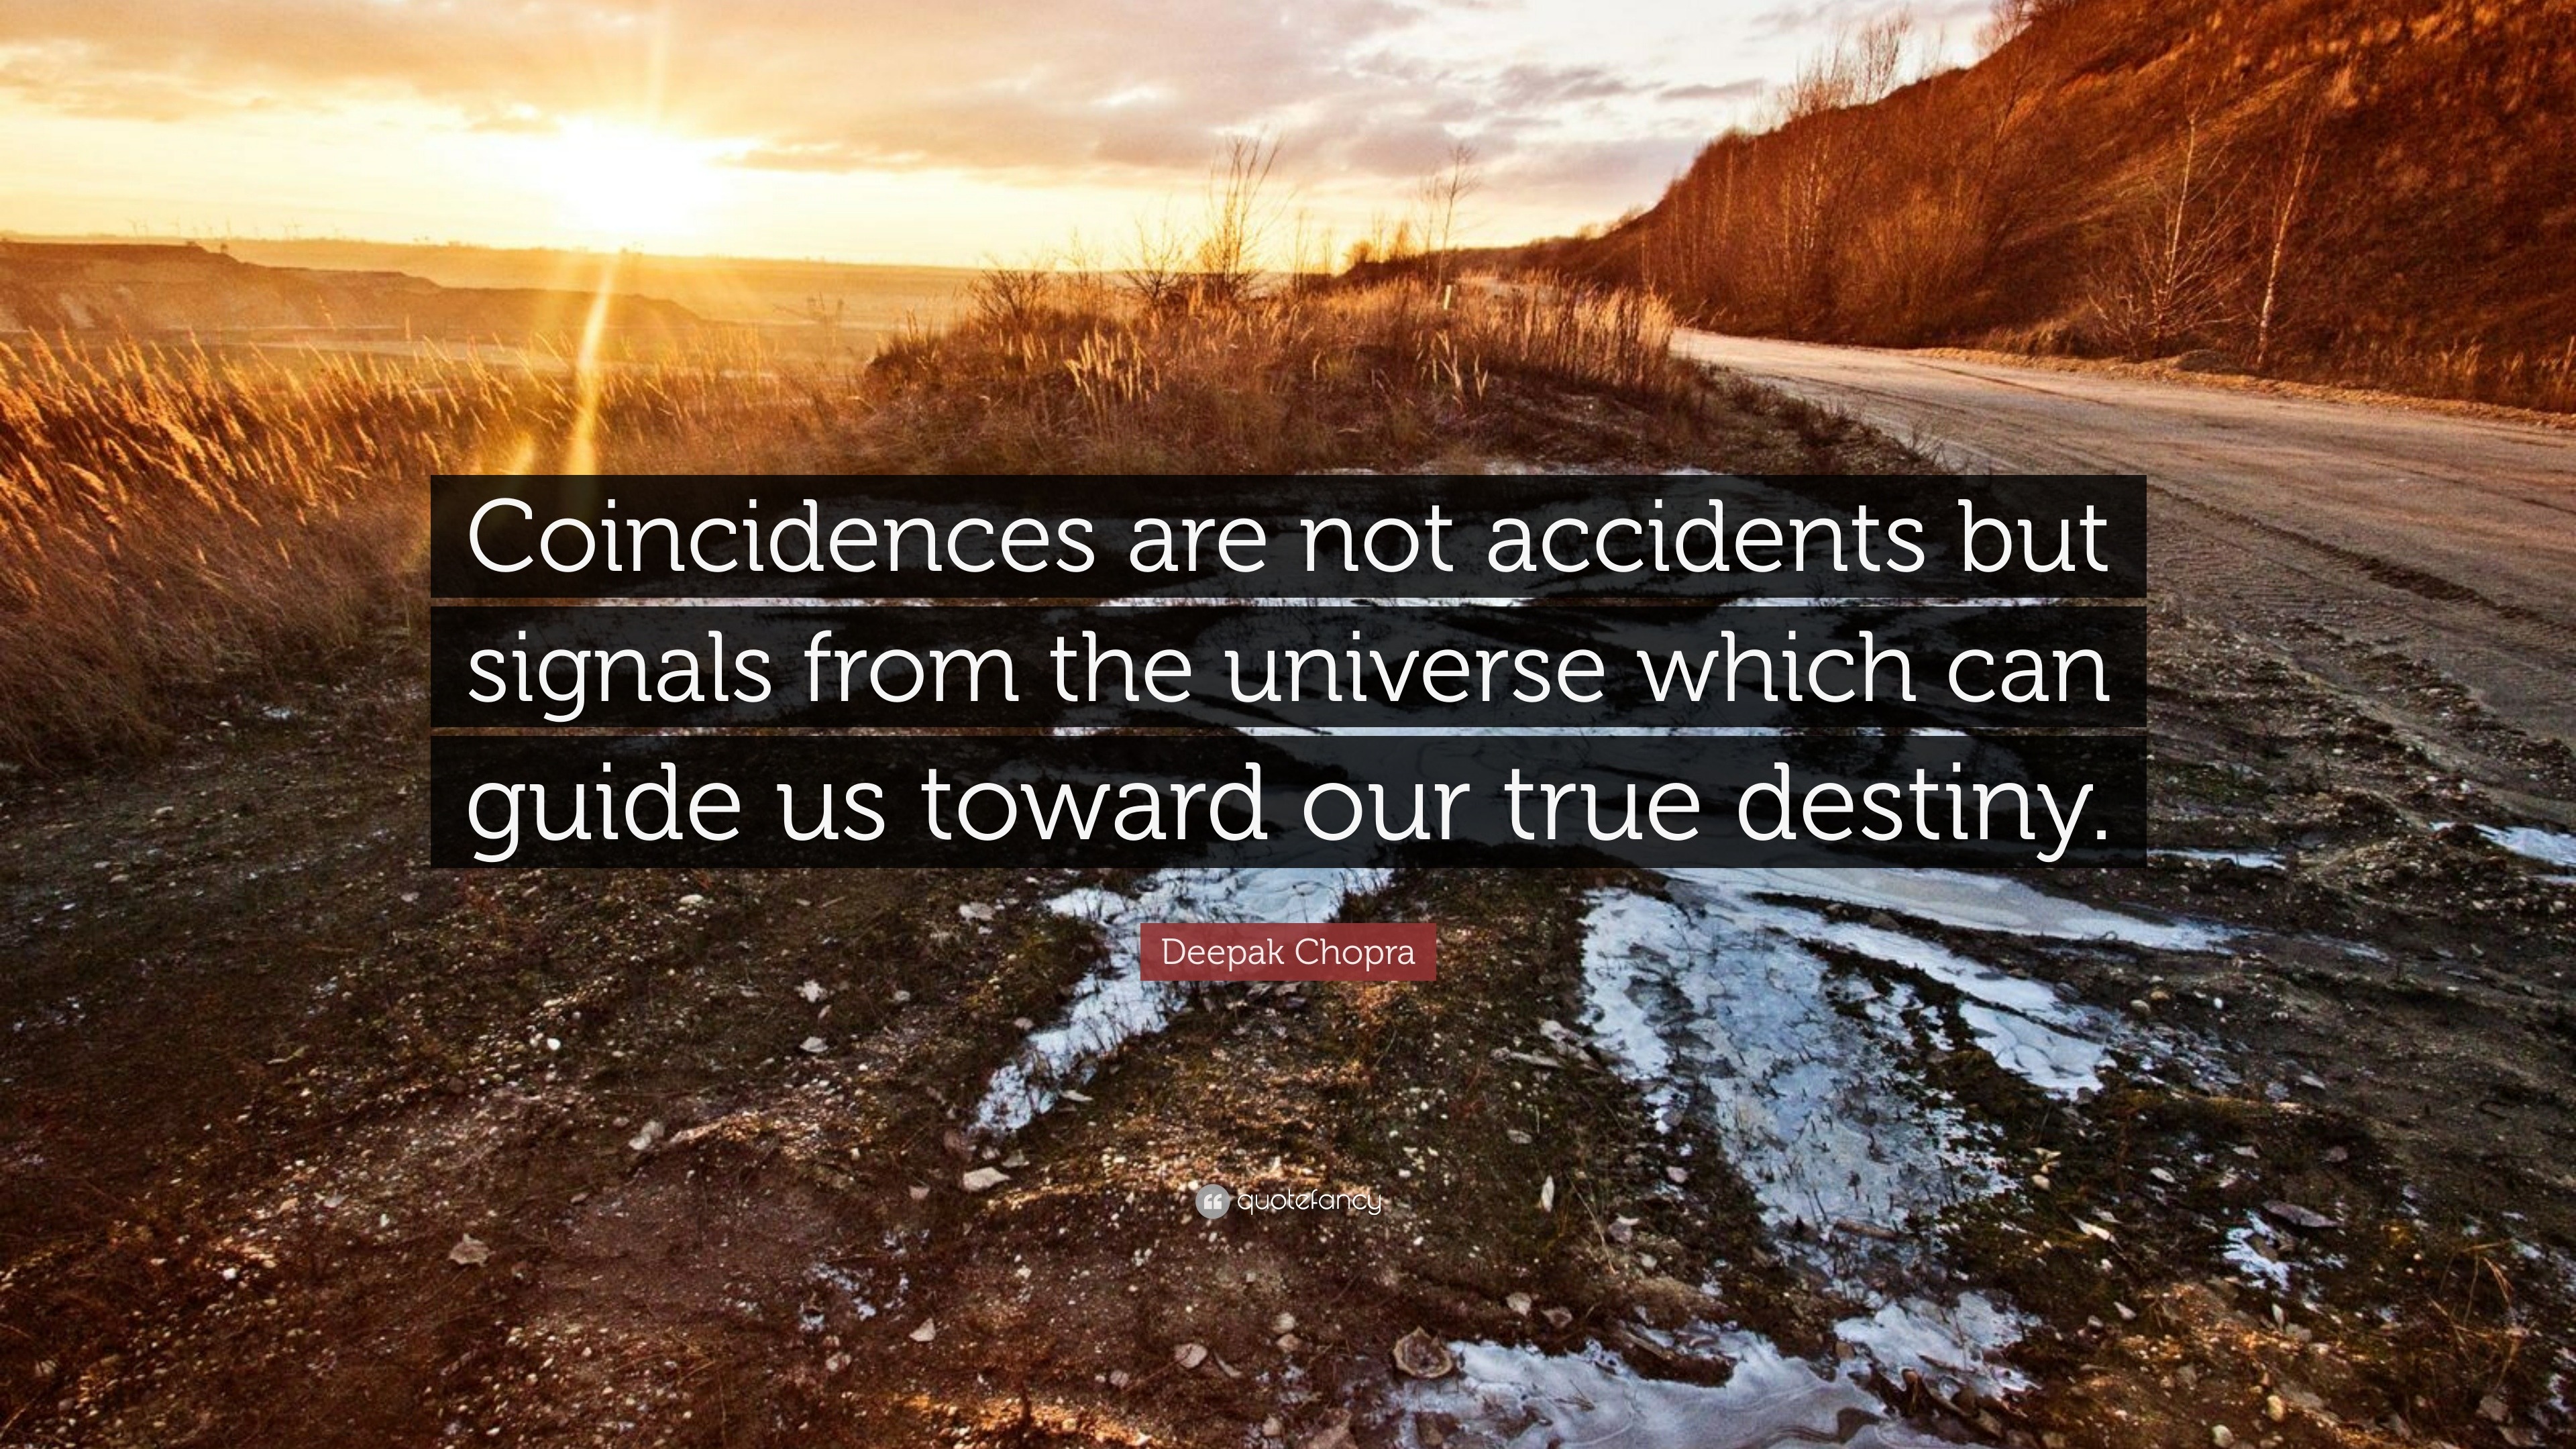 Deepak Chopra Quote “Coincidences are not accidents but signals from the universe which can